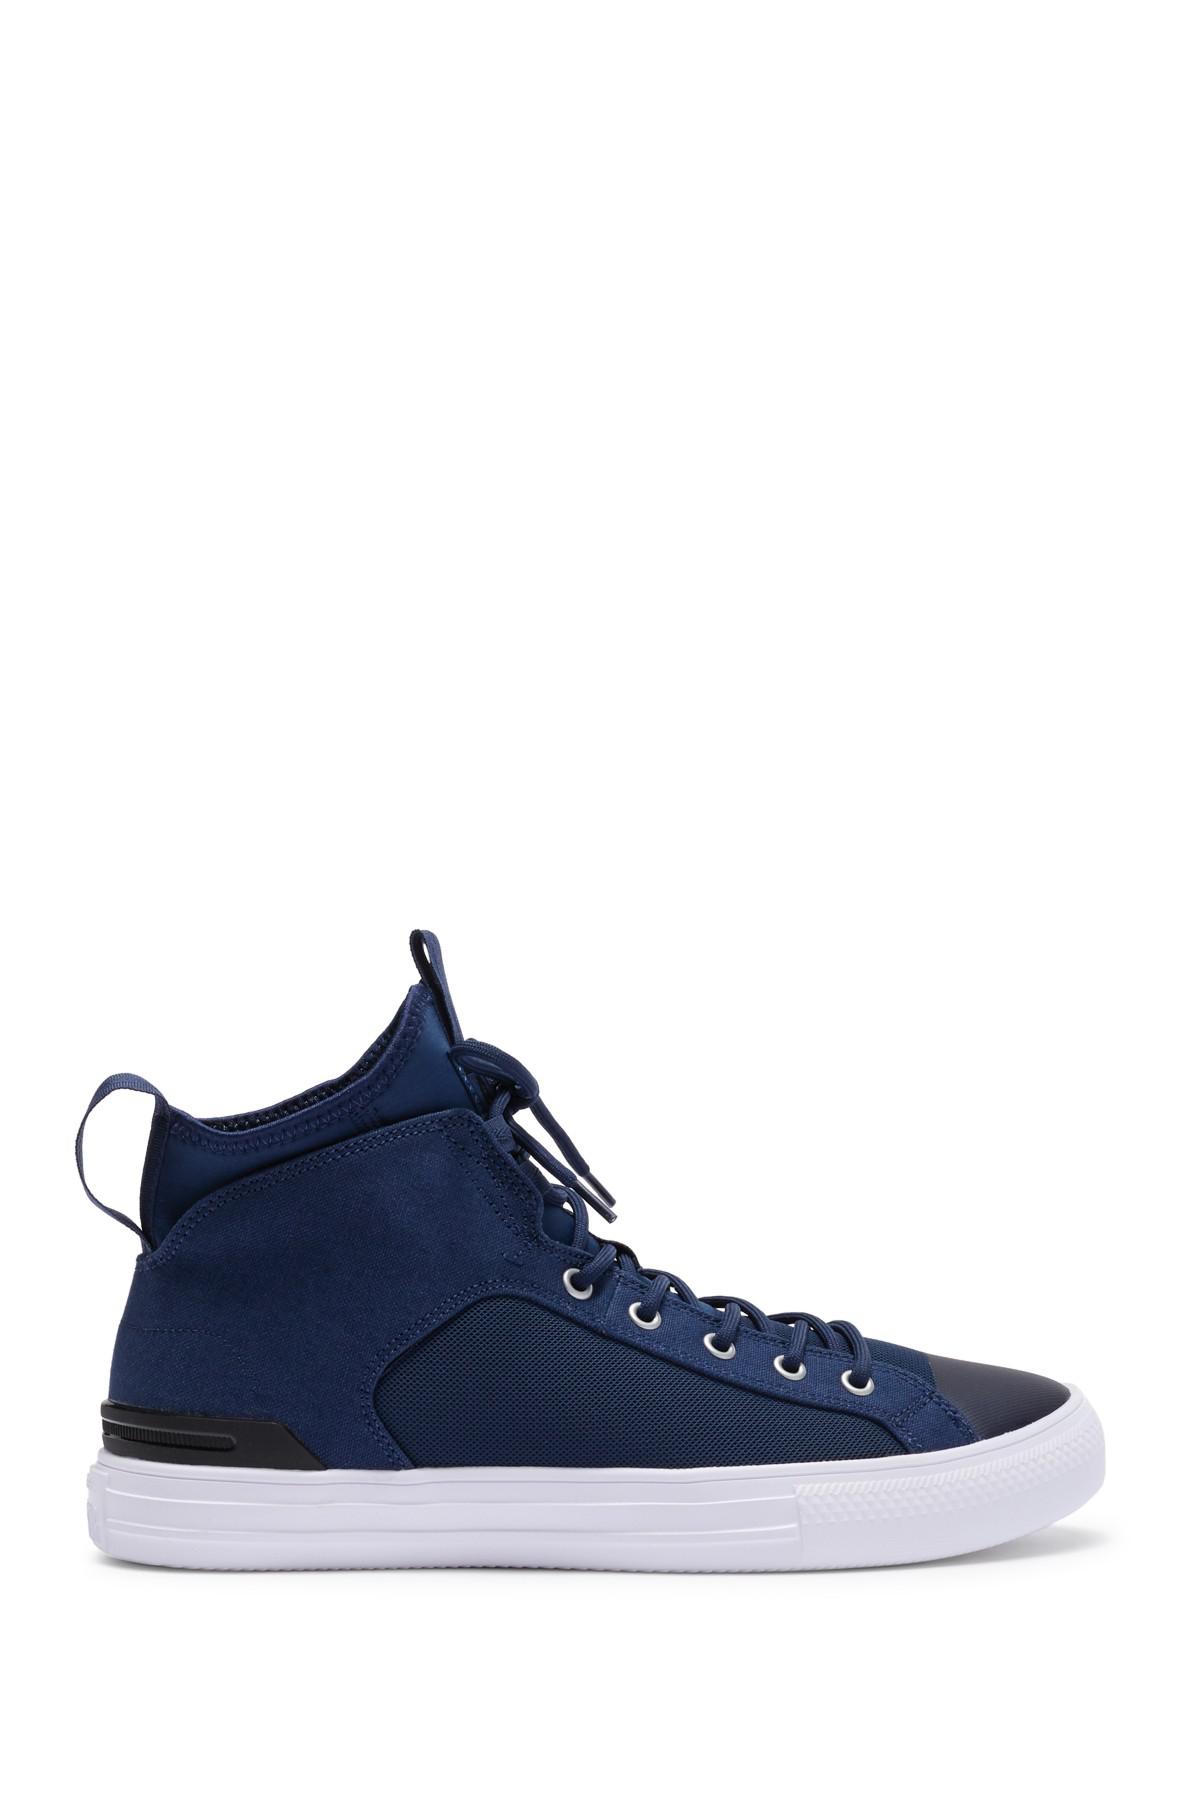 Converse Chuck Taylor All Star Ultra Mid Sneaker (unisex) in Blue for ...